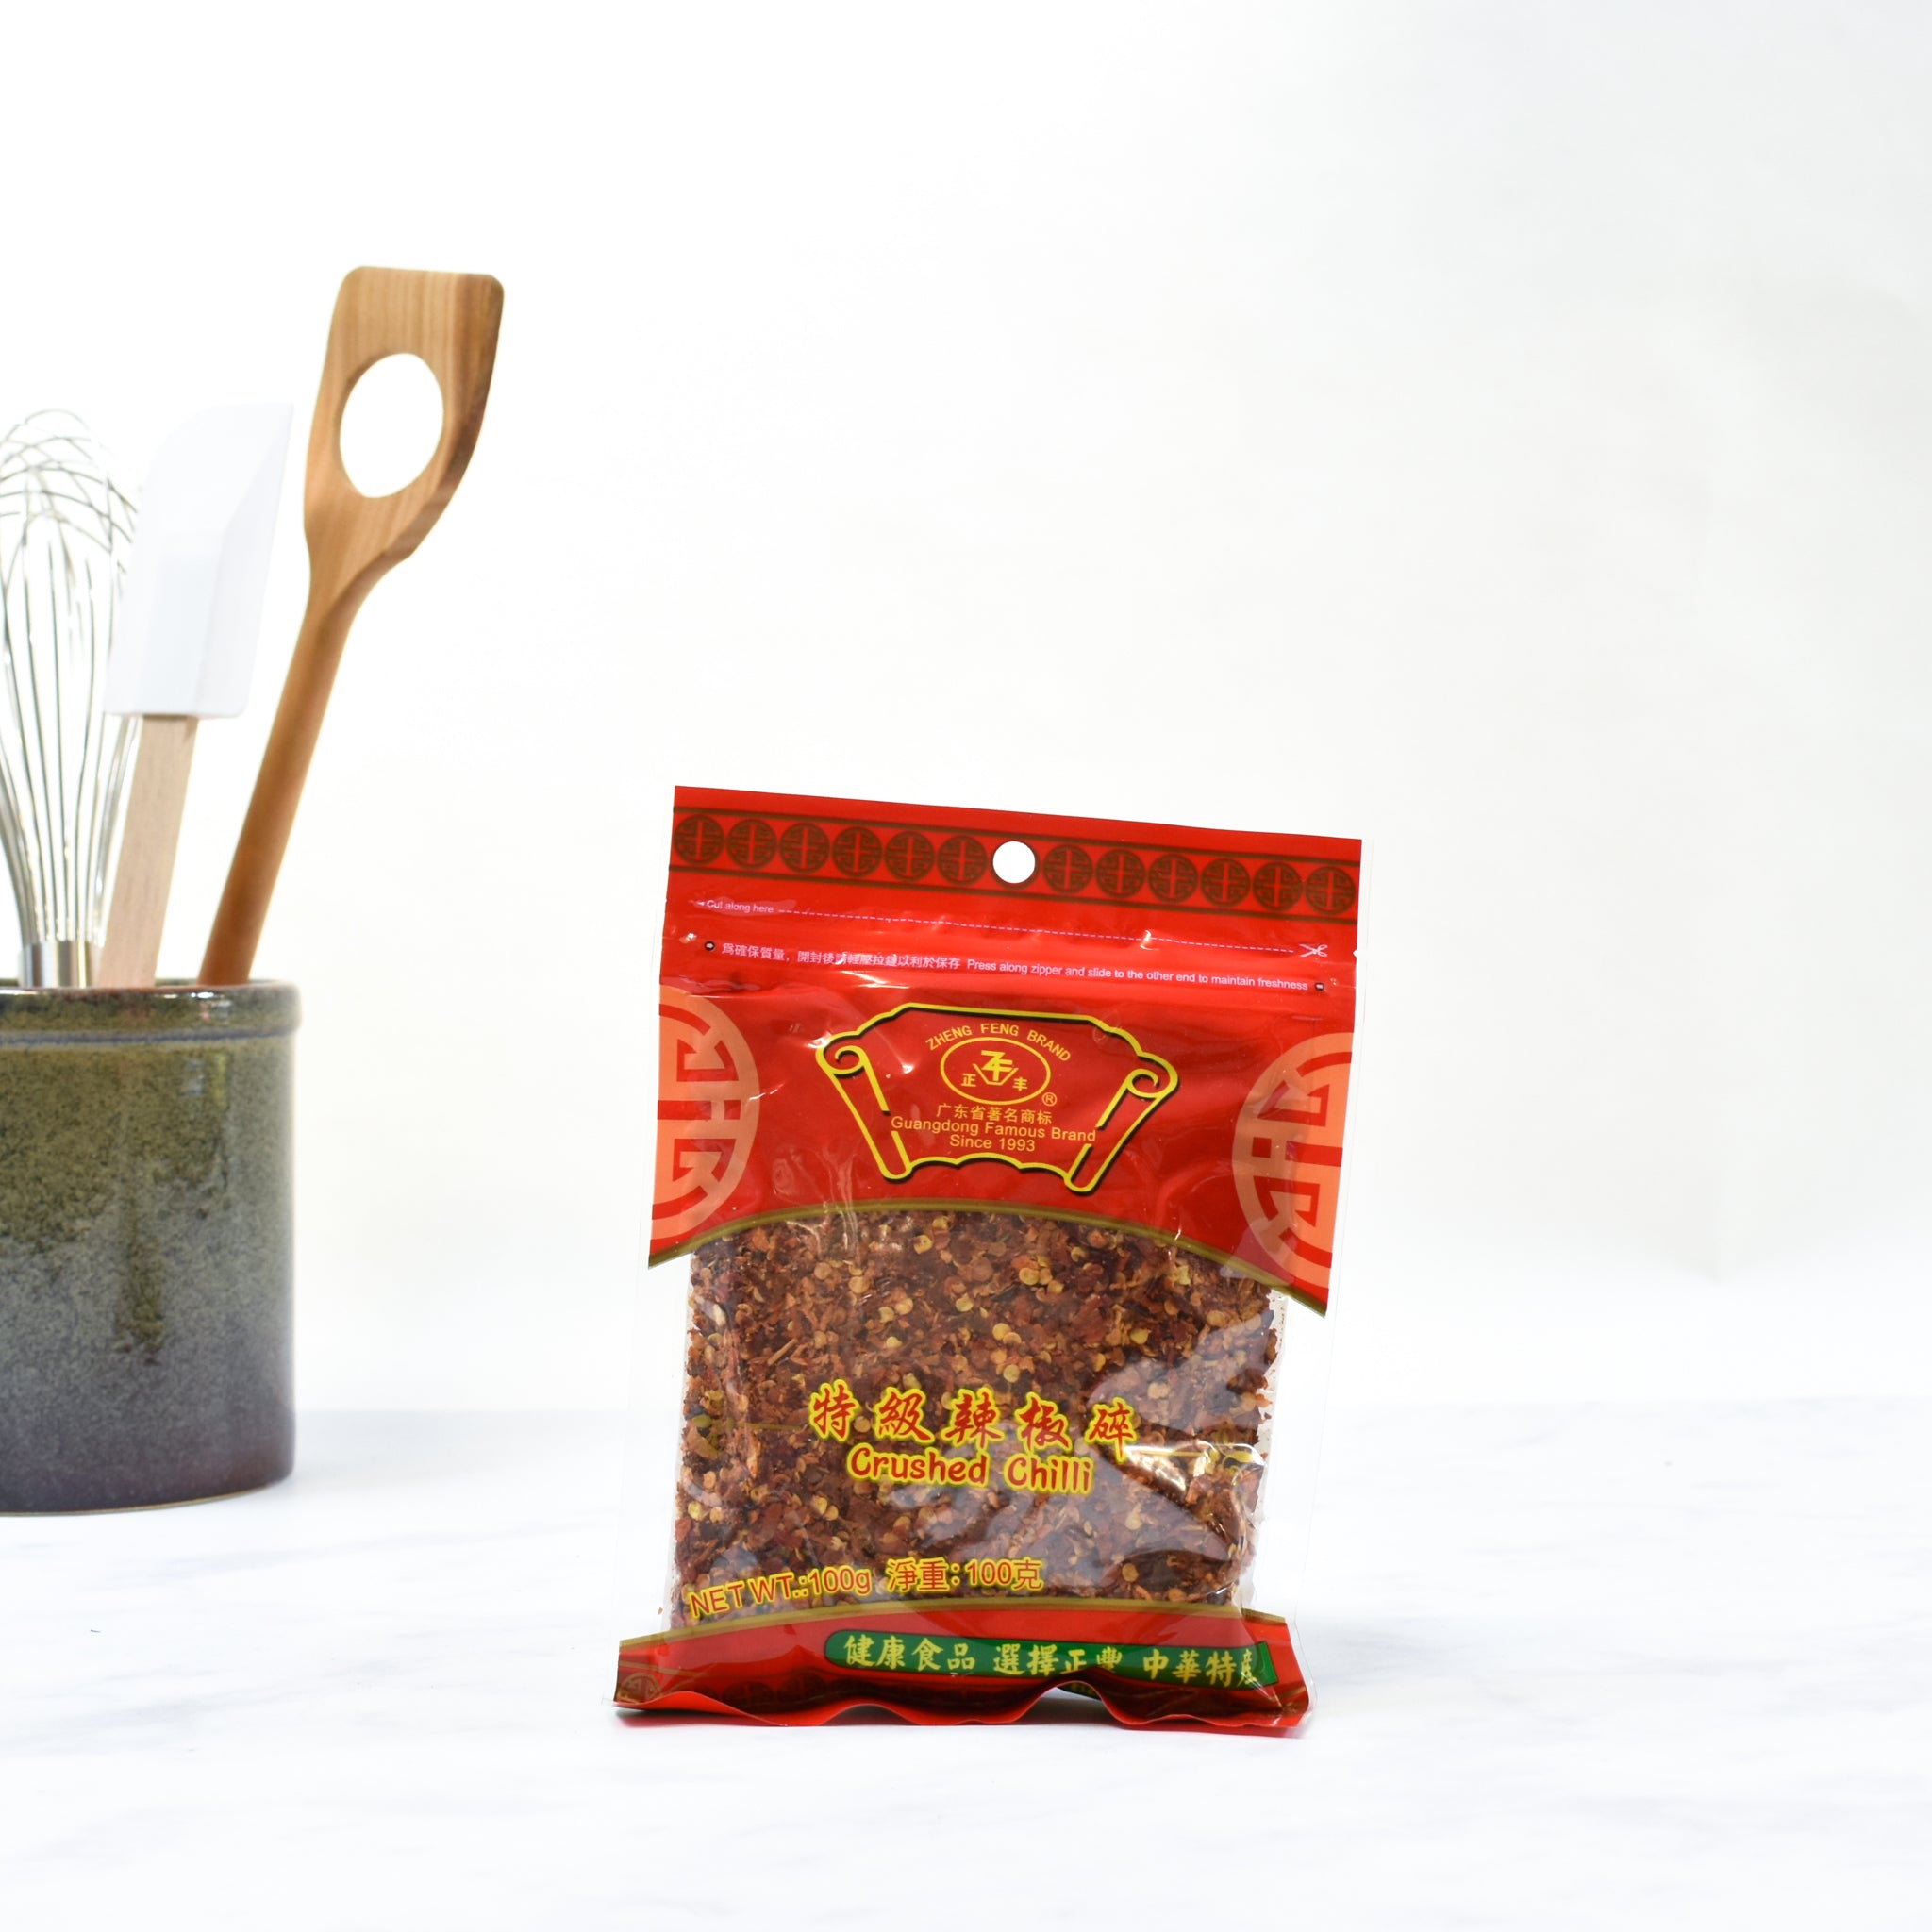 Crushed Chilli Flakes 100g lifestyle photograph